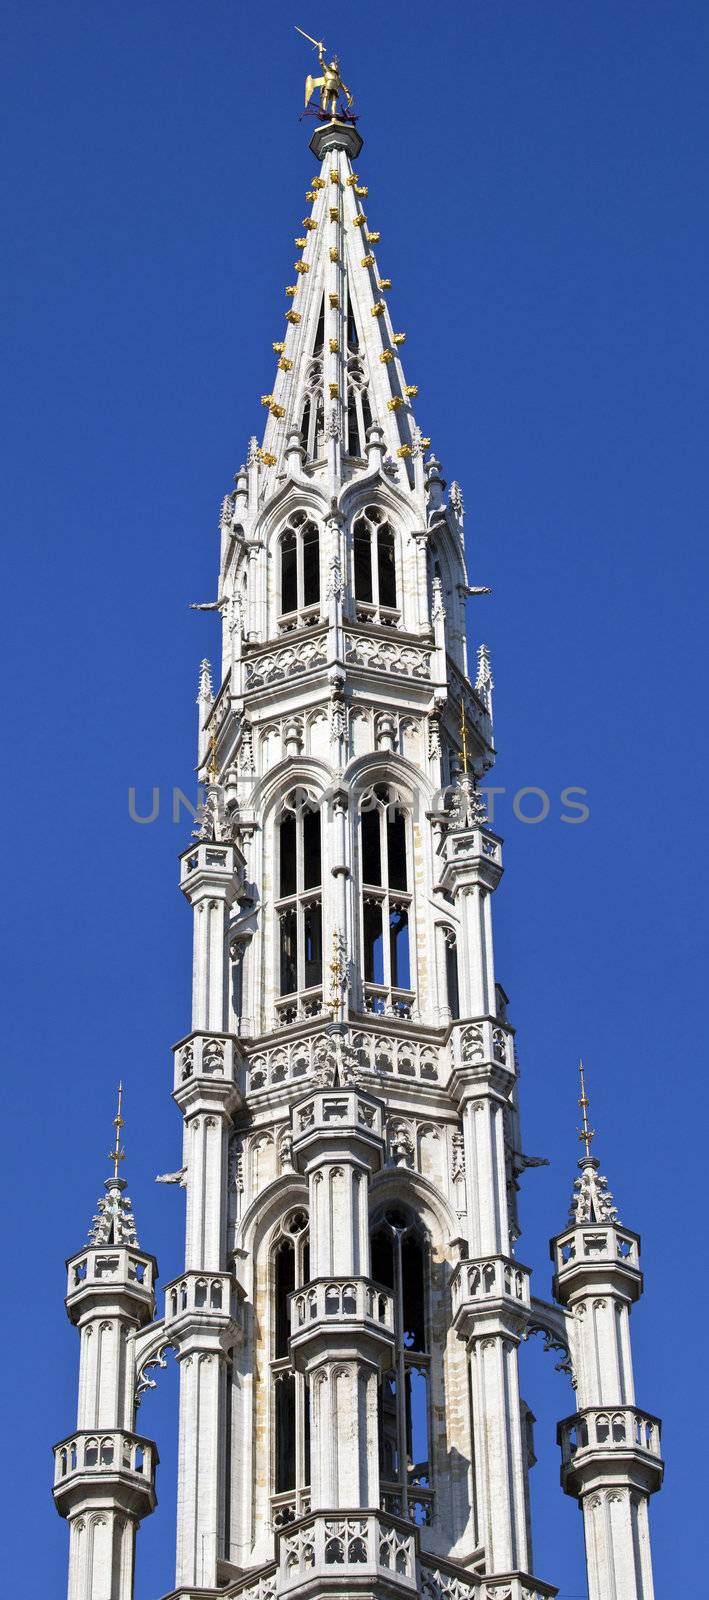 Looking up at the impressive tower Brussels Town Hall/City Hall (Hotel de Ville) located in Grand Place.